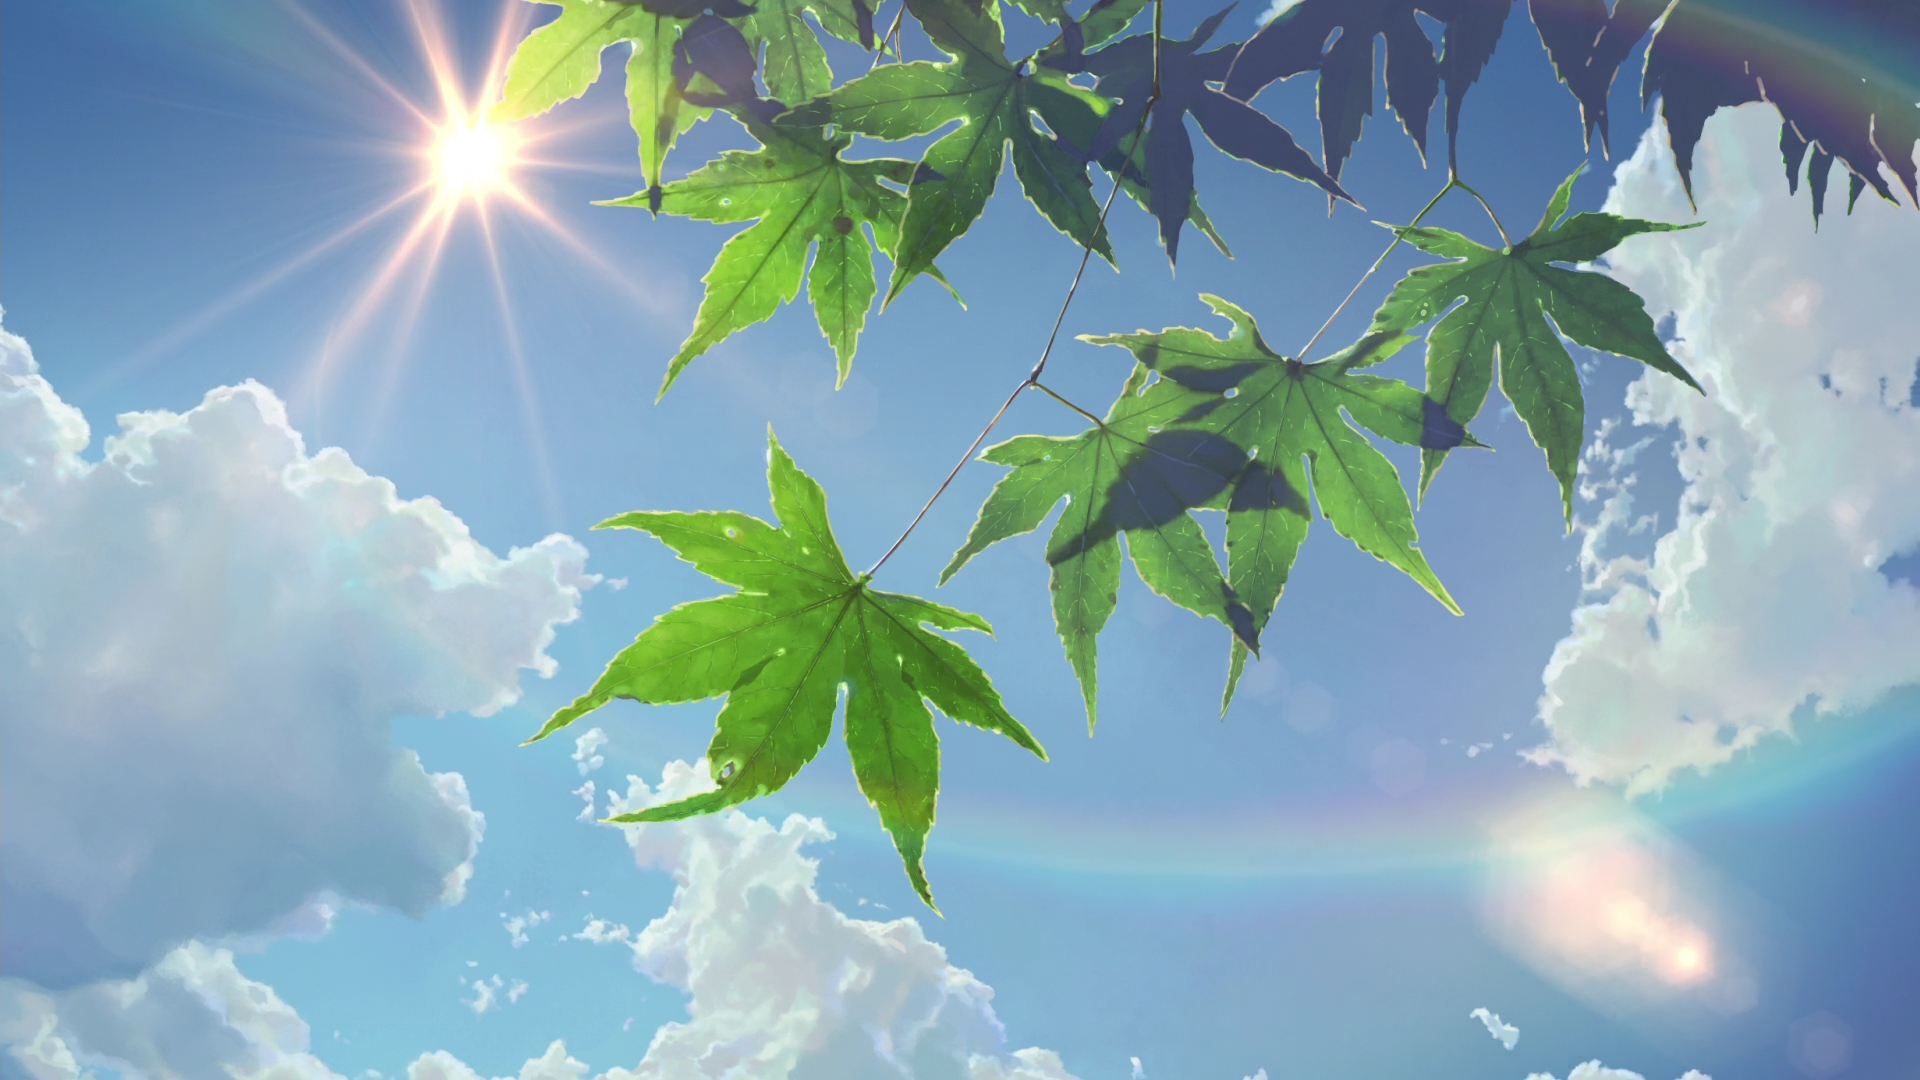 Desktop Wallpaper Leaves, Tree, Anime, Sun, Clouds, HD Image, Picture, Background, O33xdp